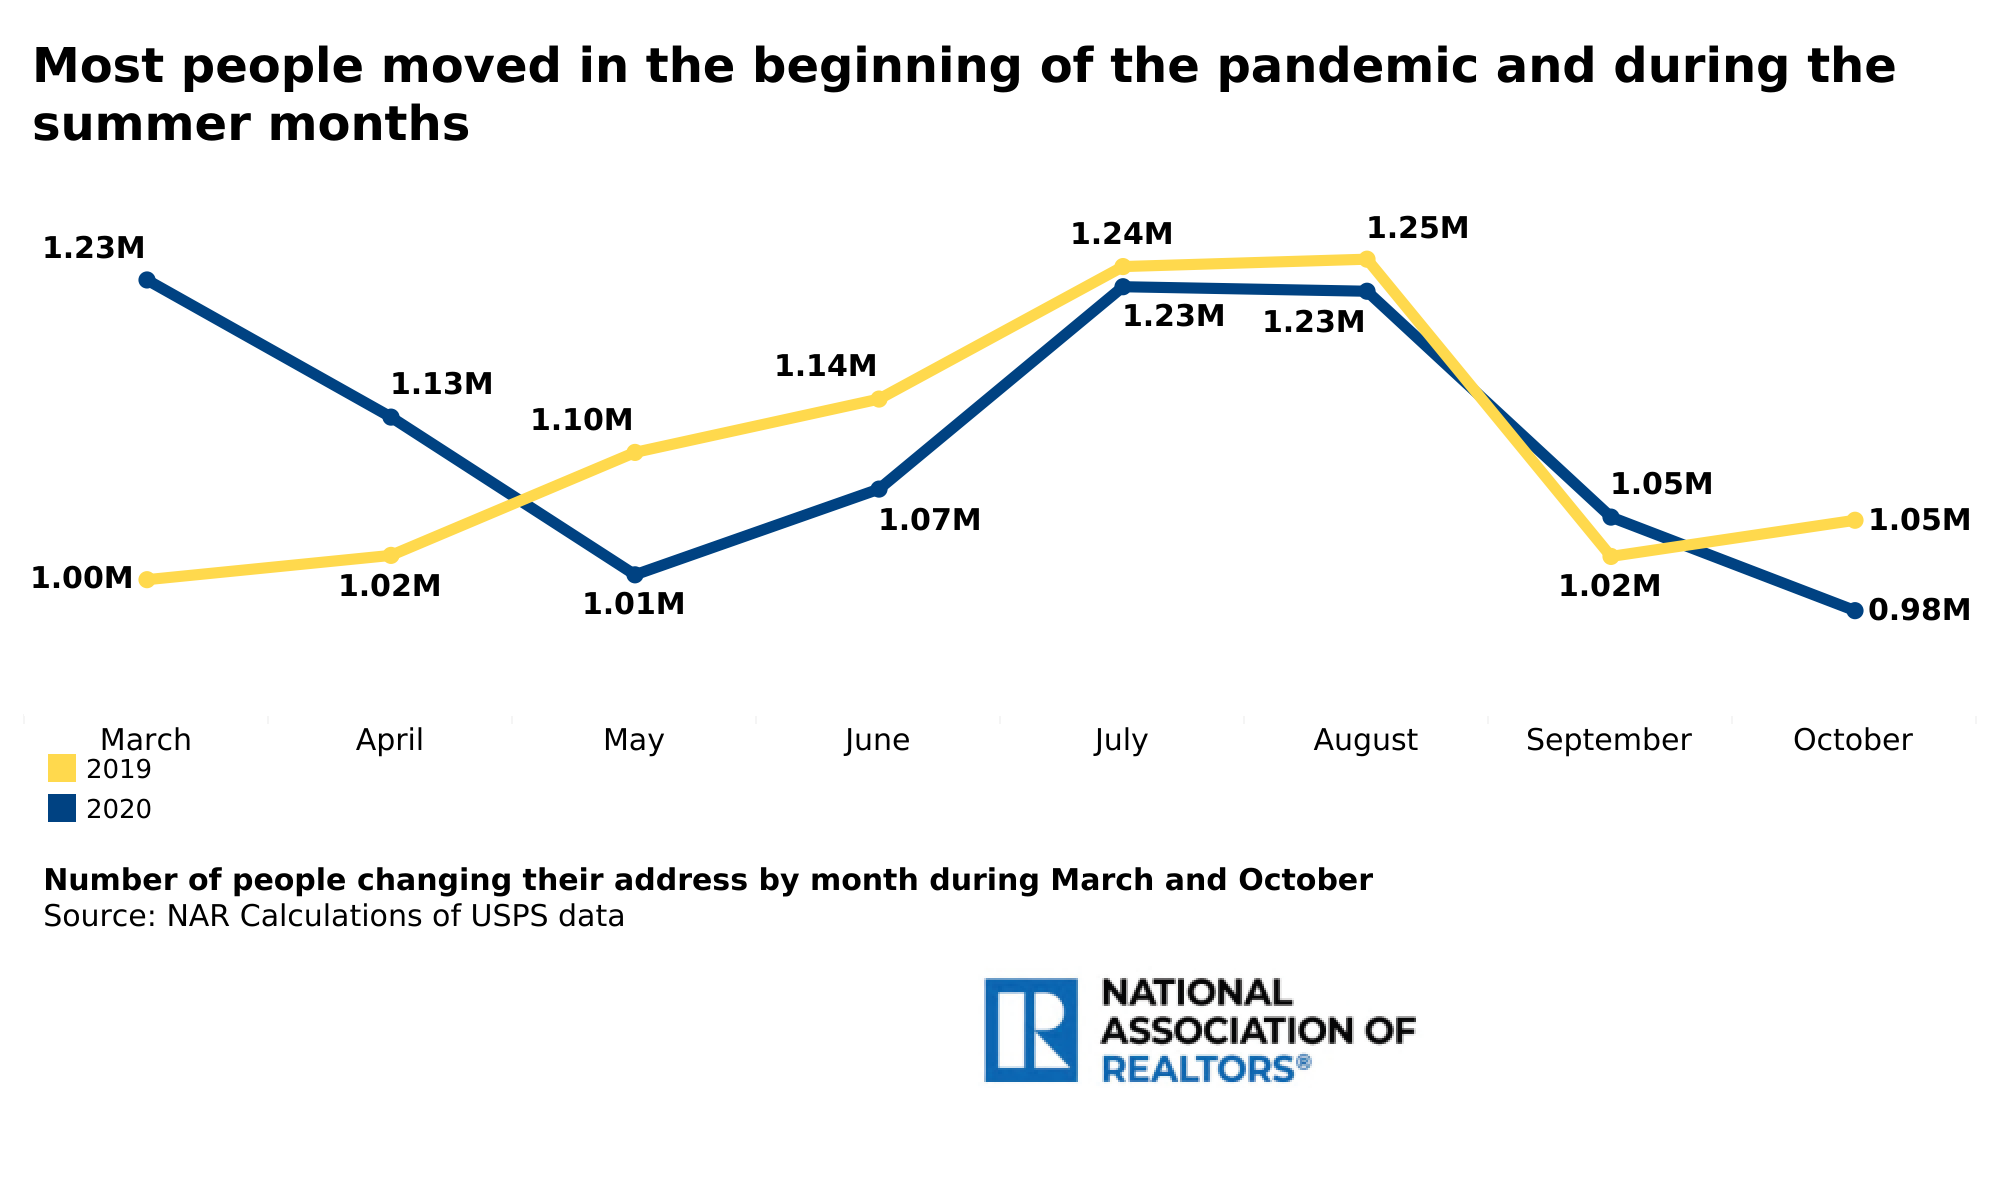 8.9 Million People Relocated Since the Beginning of the Pandemic